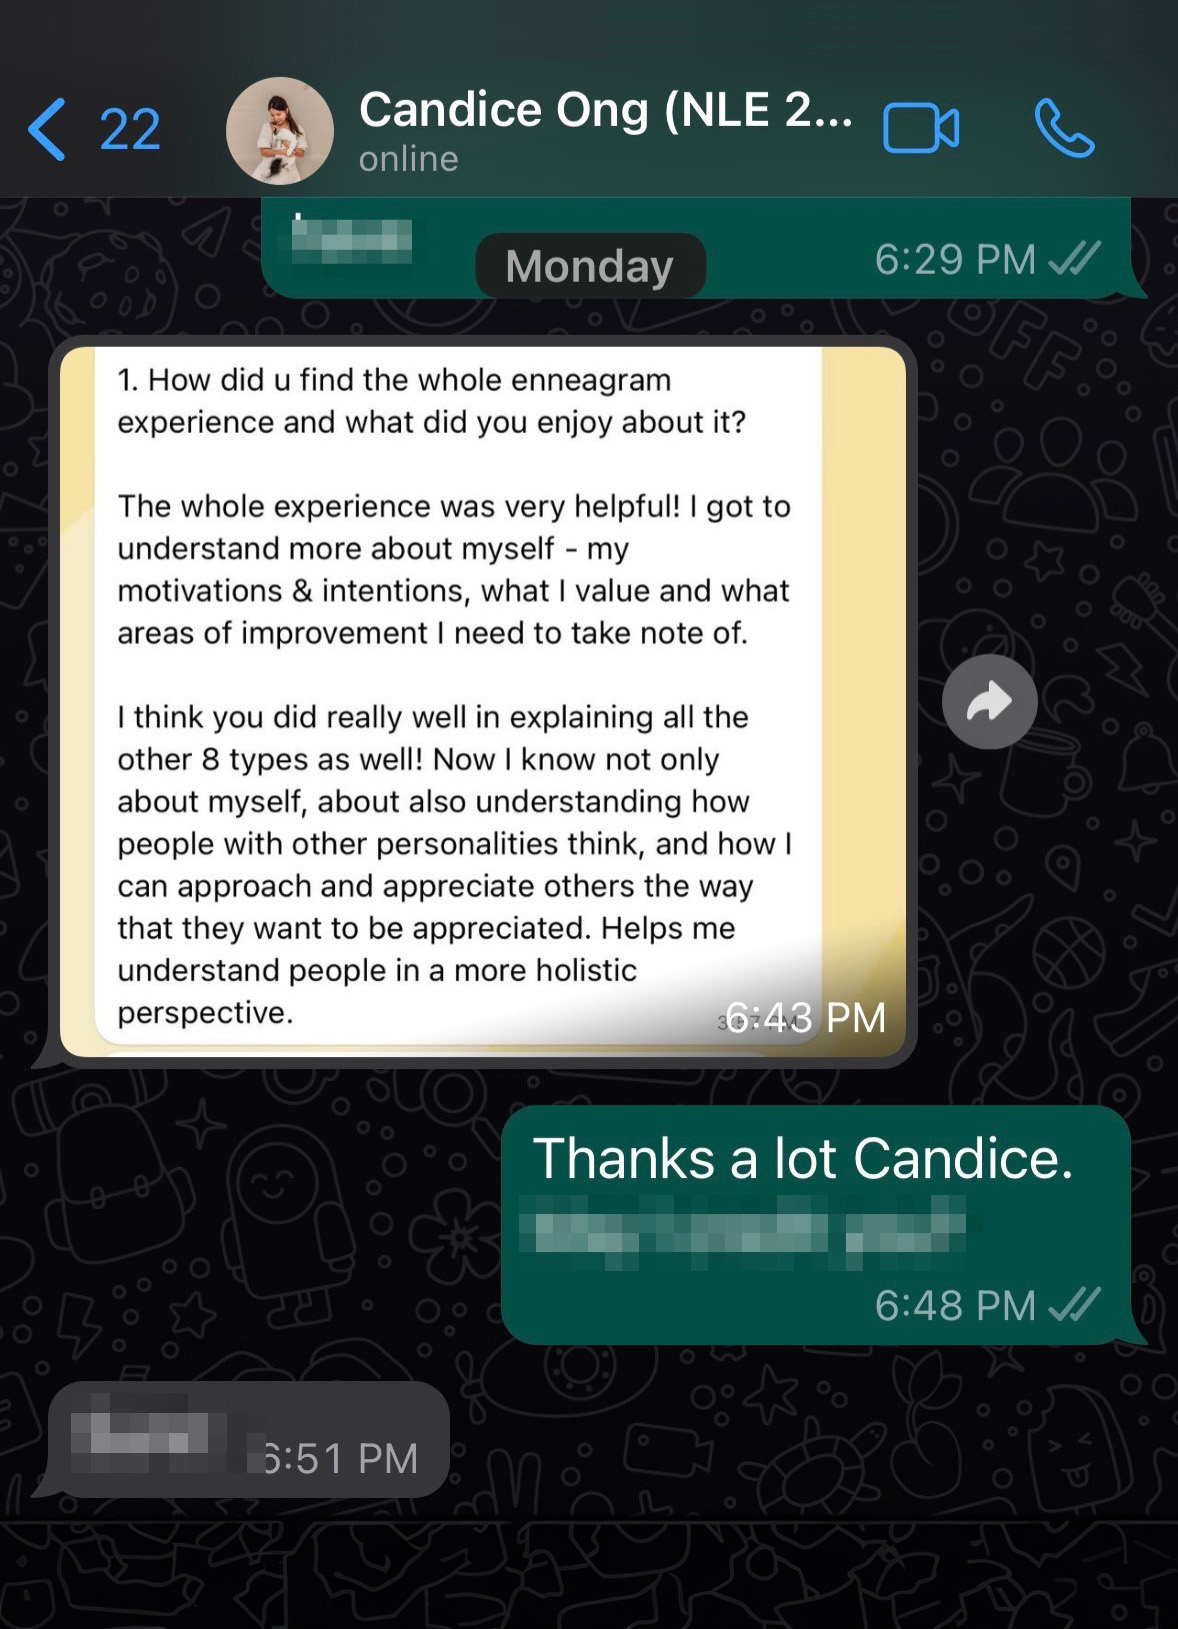 NLE Practitioner success story - Candice